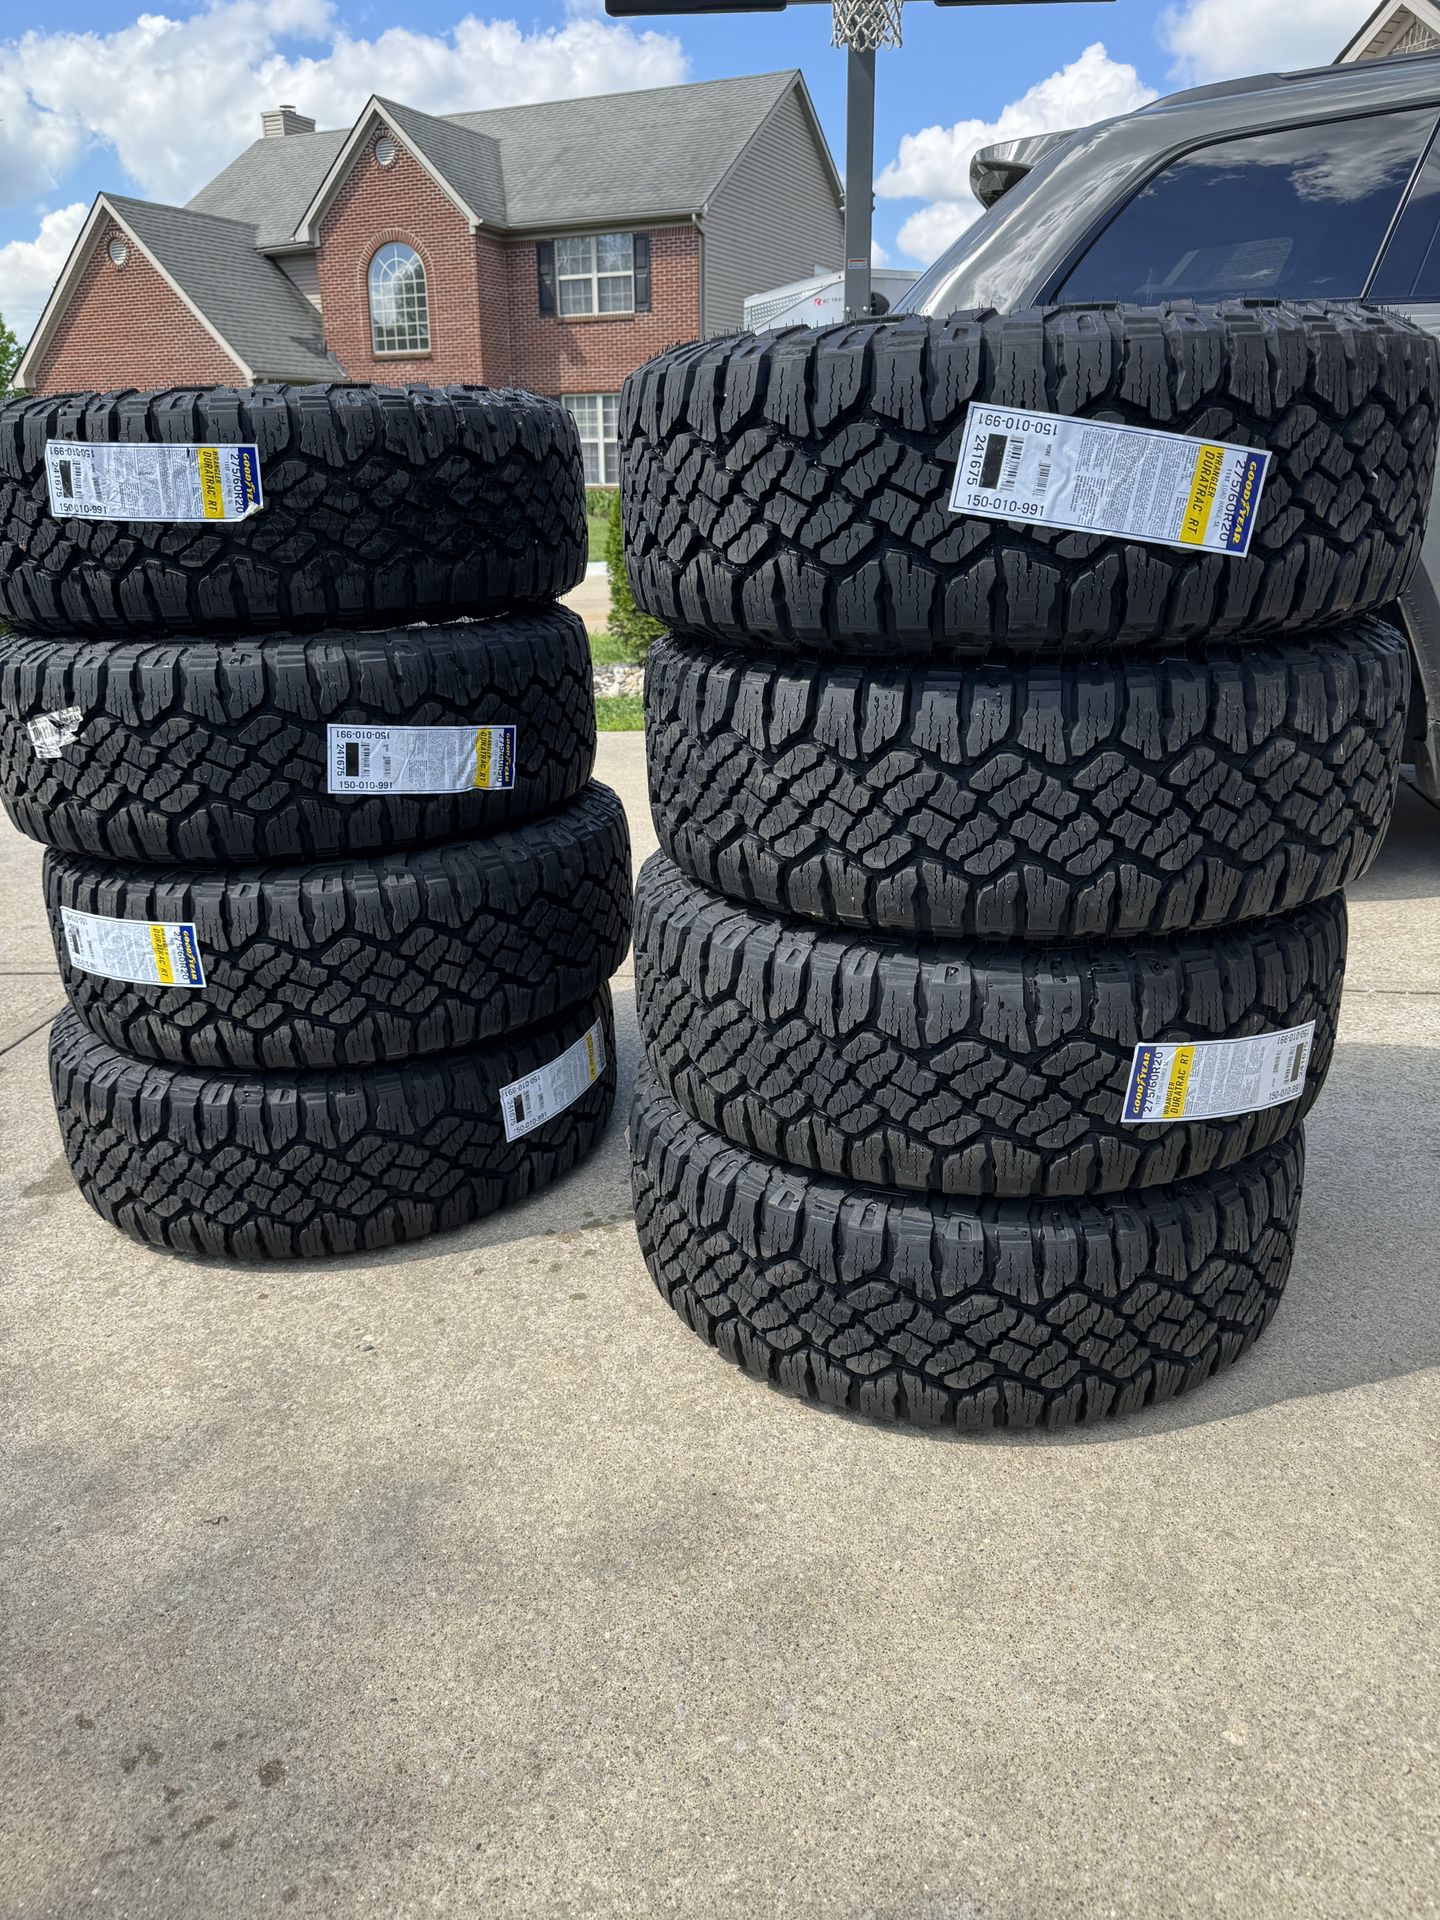 275/60R20 Goodyear Wrangler Duratrac RT 115T SL Black Wall Tire 1(contact info removed)1